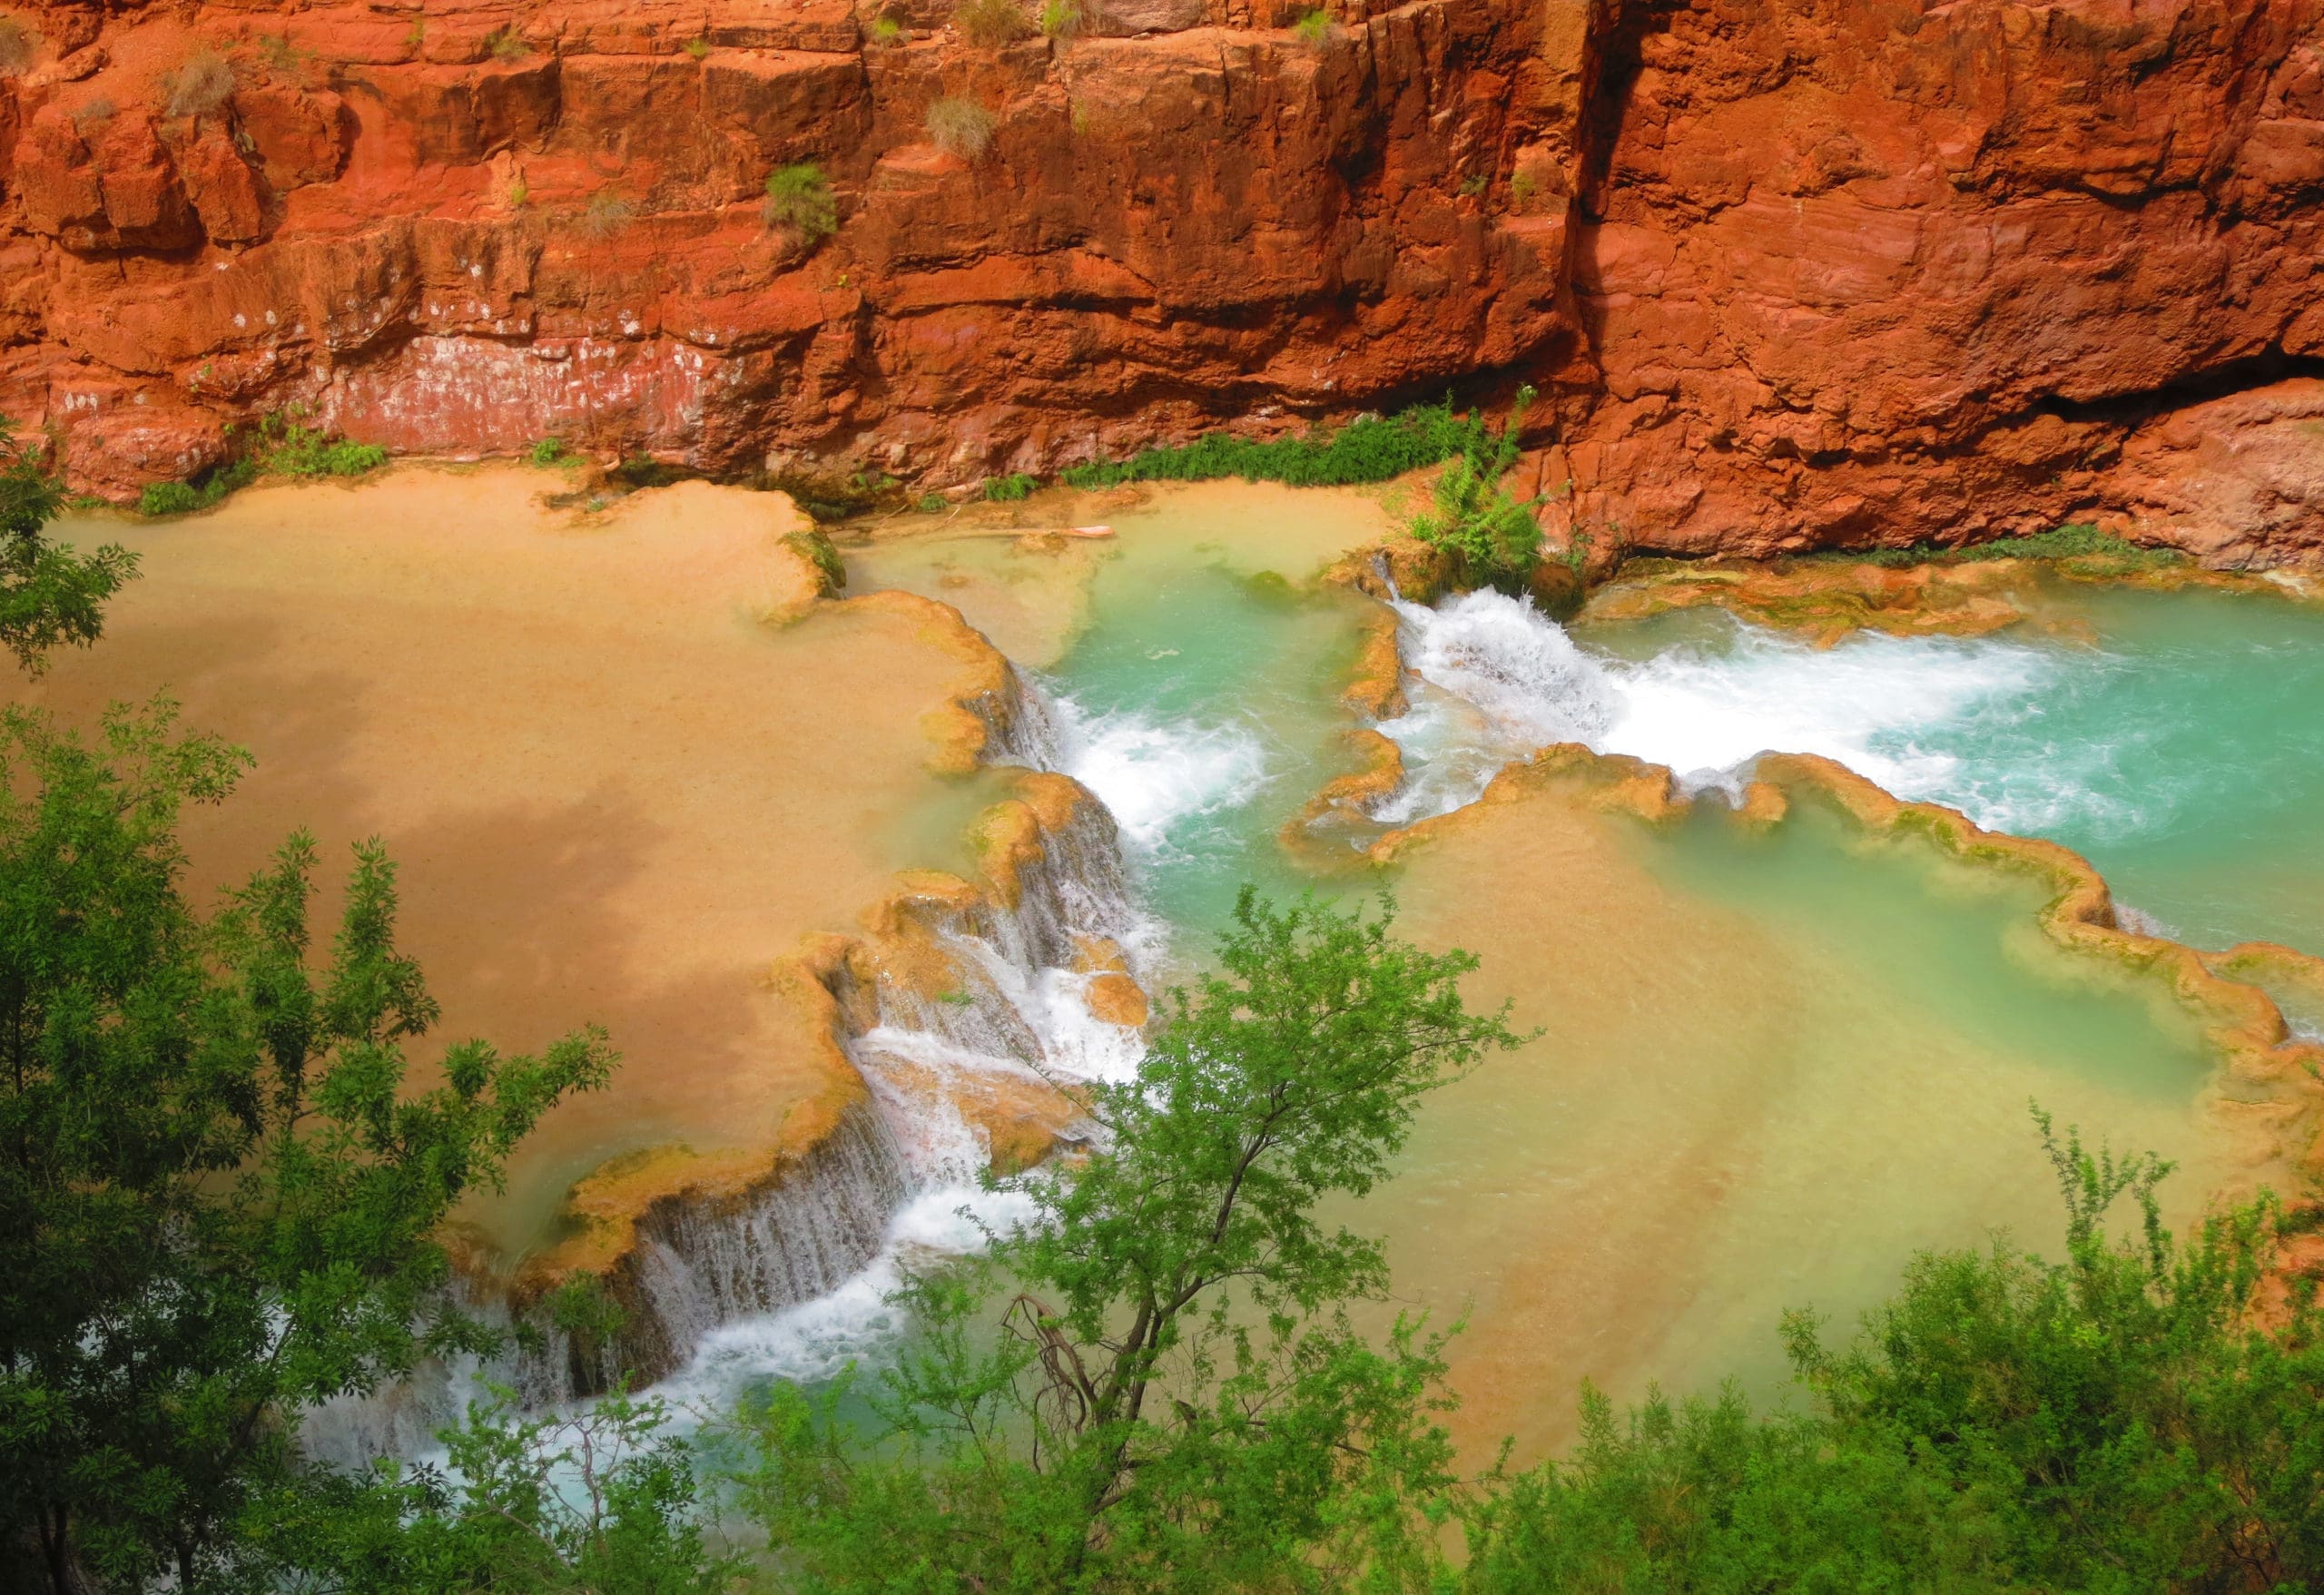 Hiking in the Grand Canyon's Havasupai Indian Reservation Artful